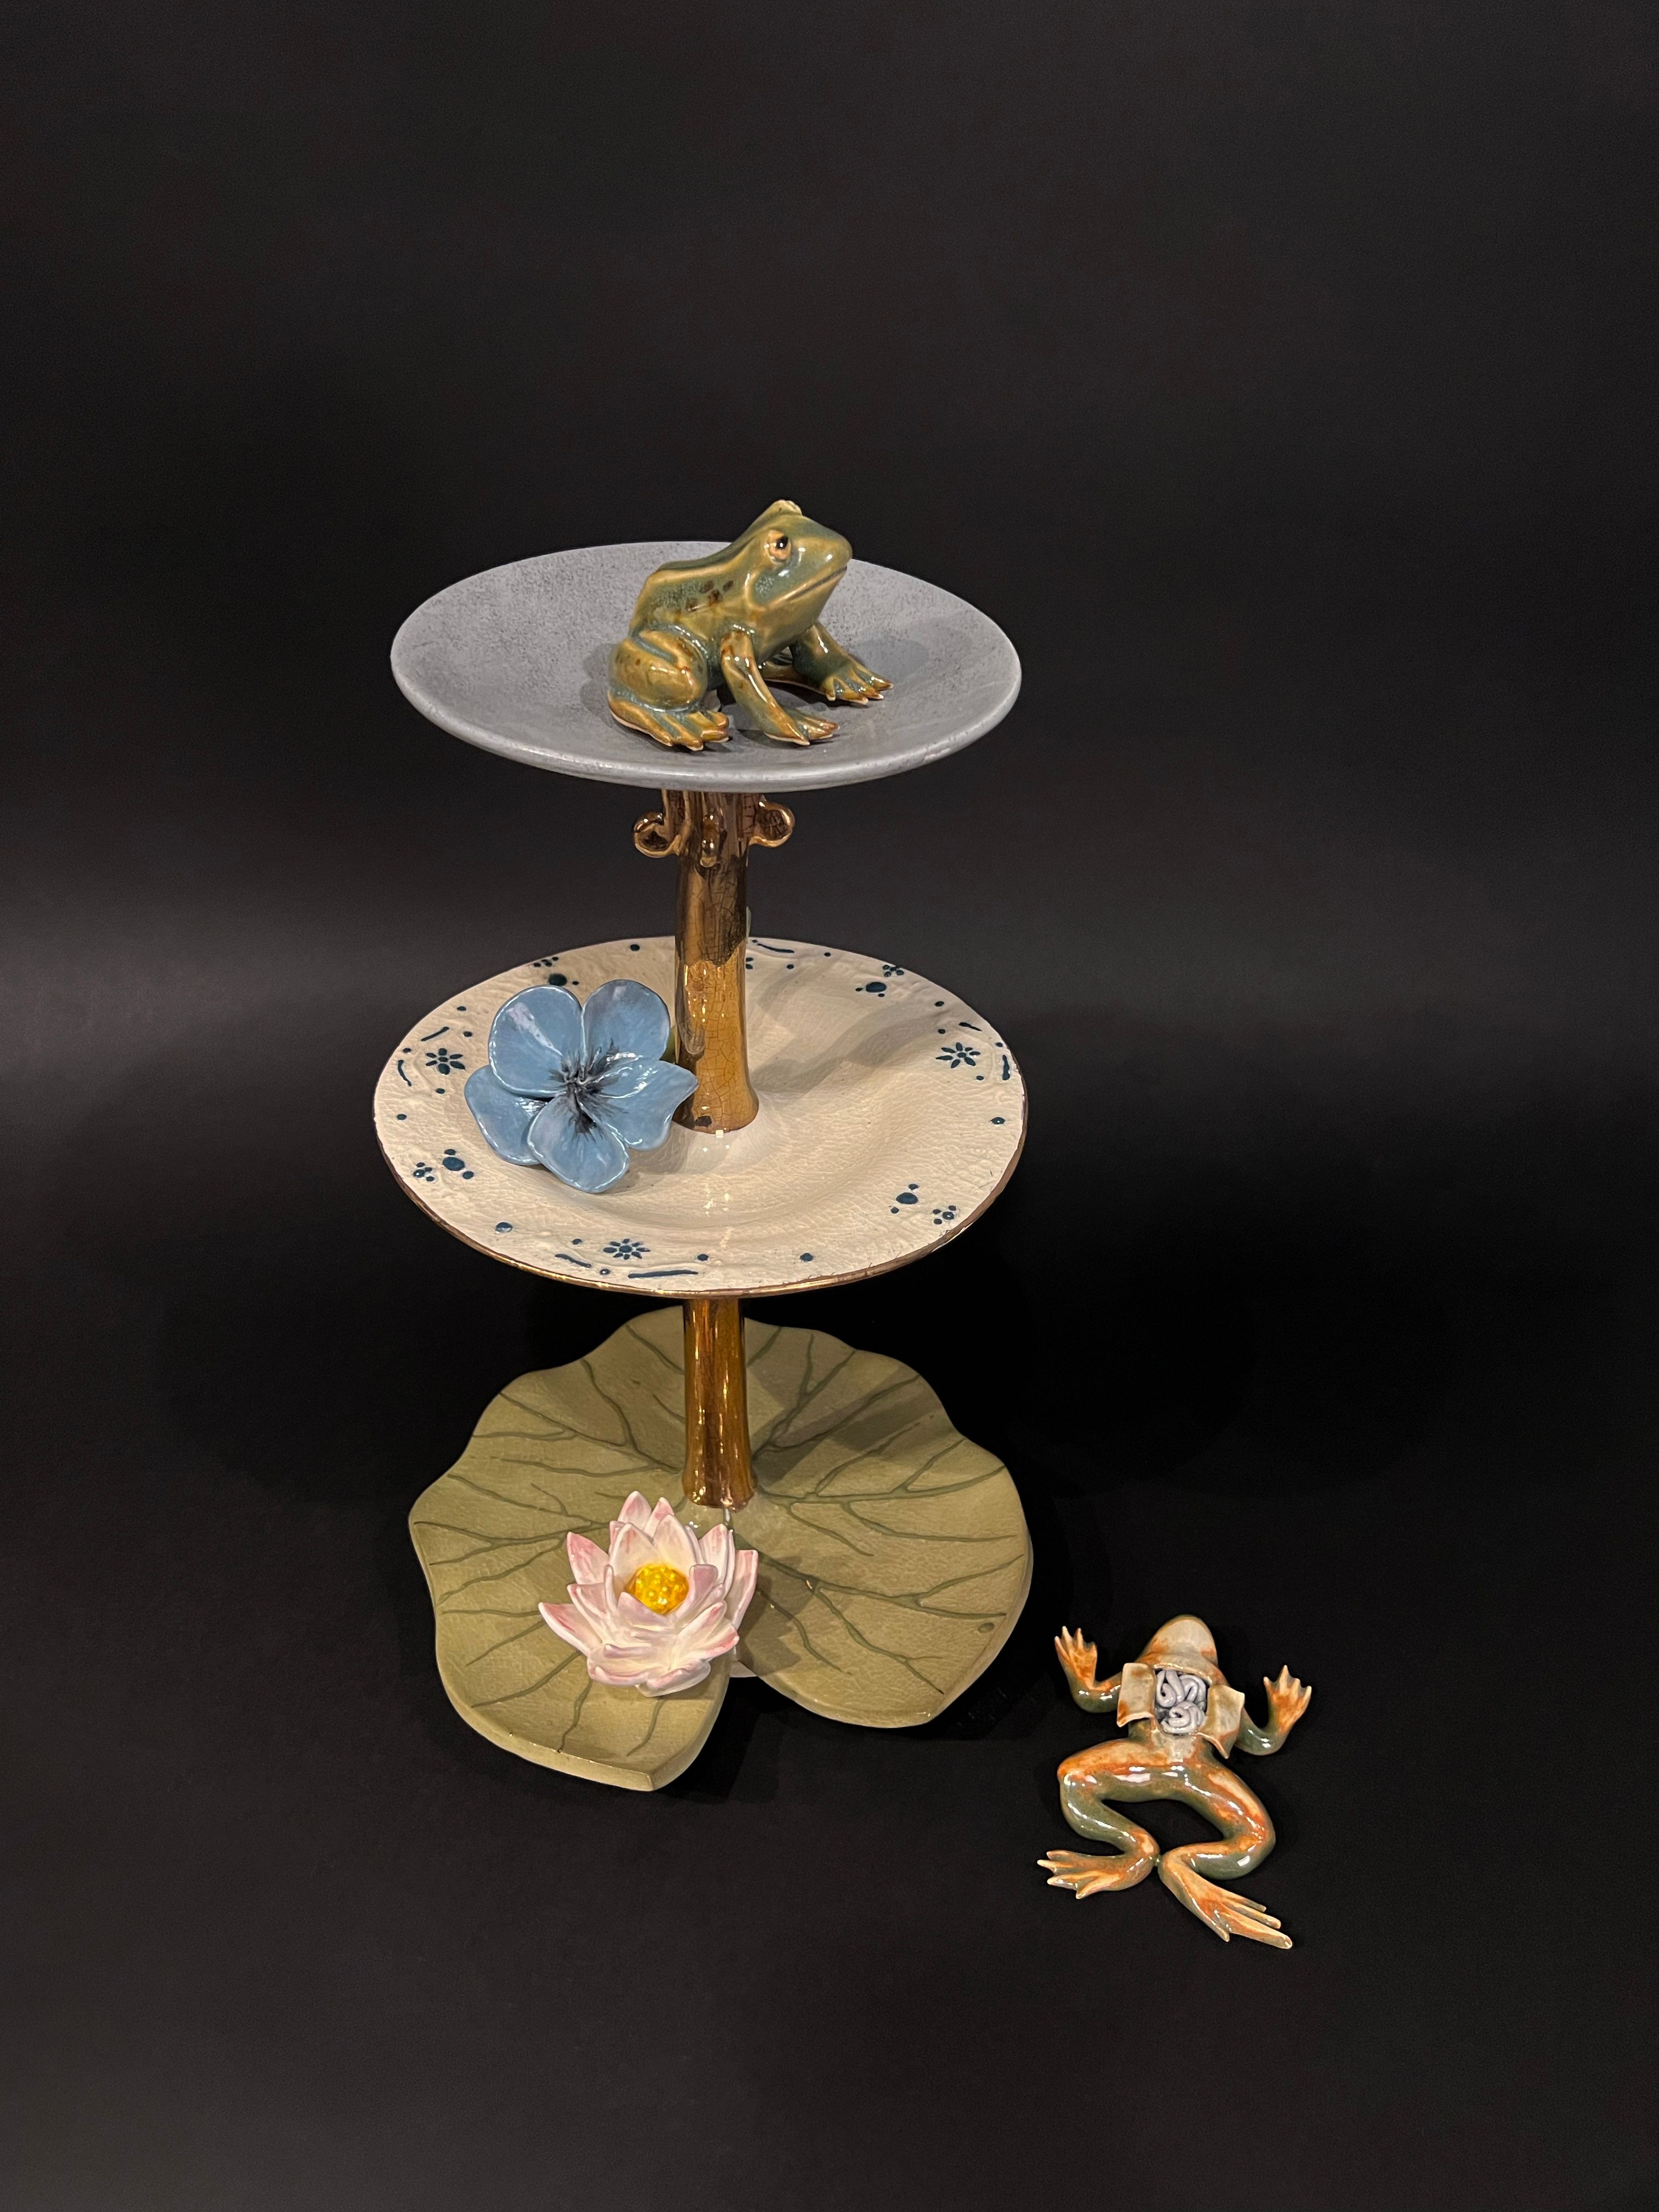 ceramic and glazed sculpture made from hand dyed porcelain. The tiers of these frogs' world are meant to look like a victorian tea tray, insinuating that their plight is merely for our entertainment or acquisition of knowledge. 